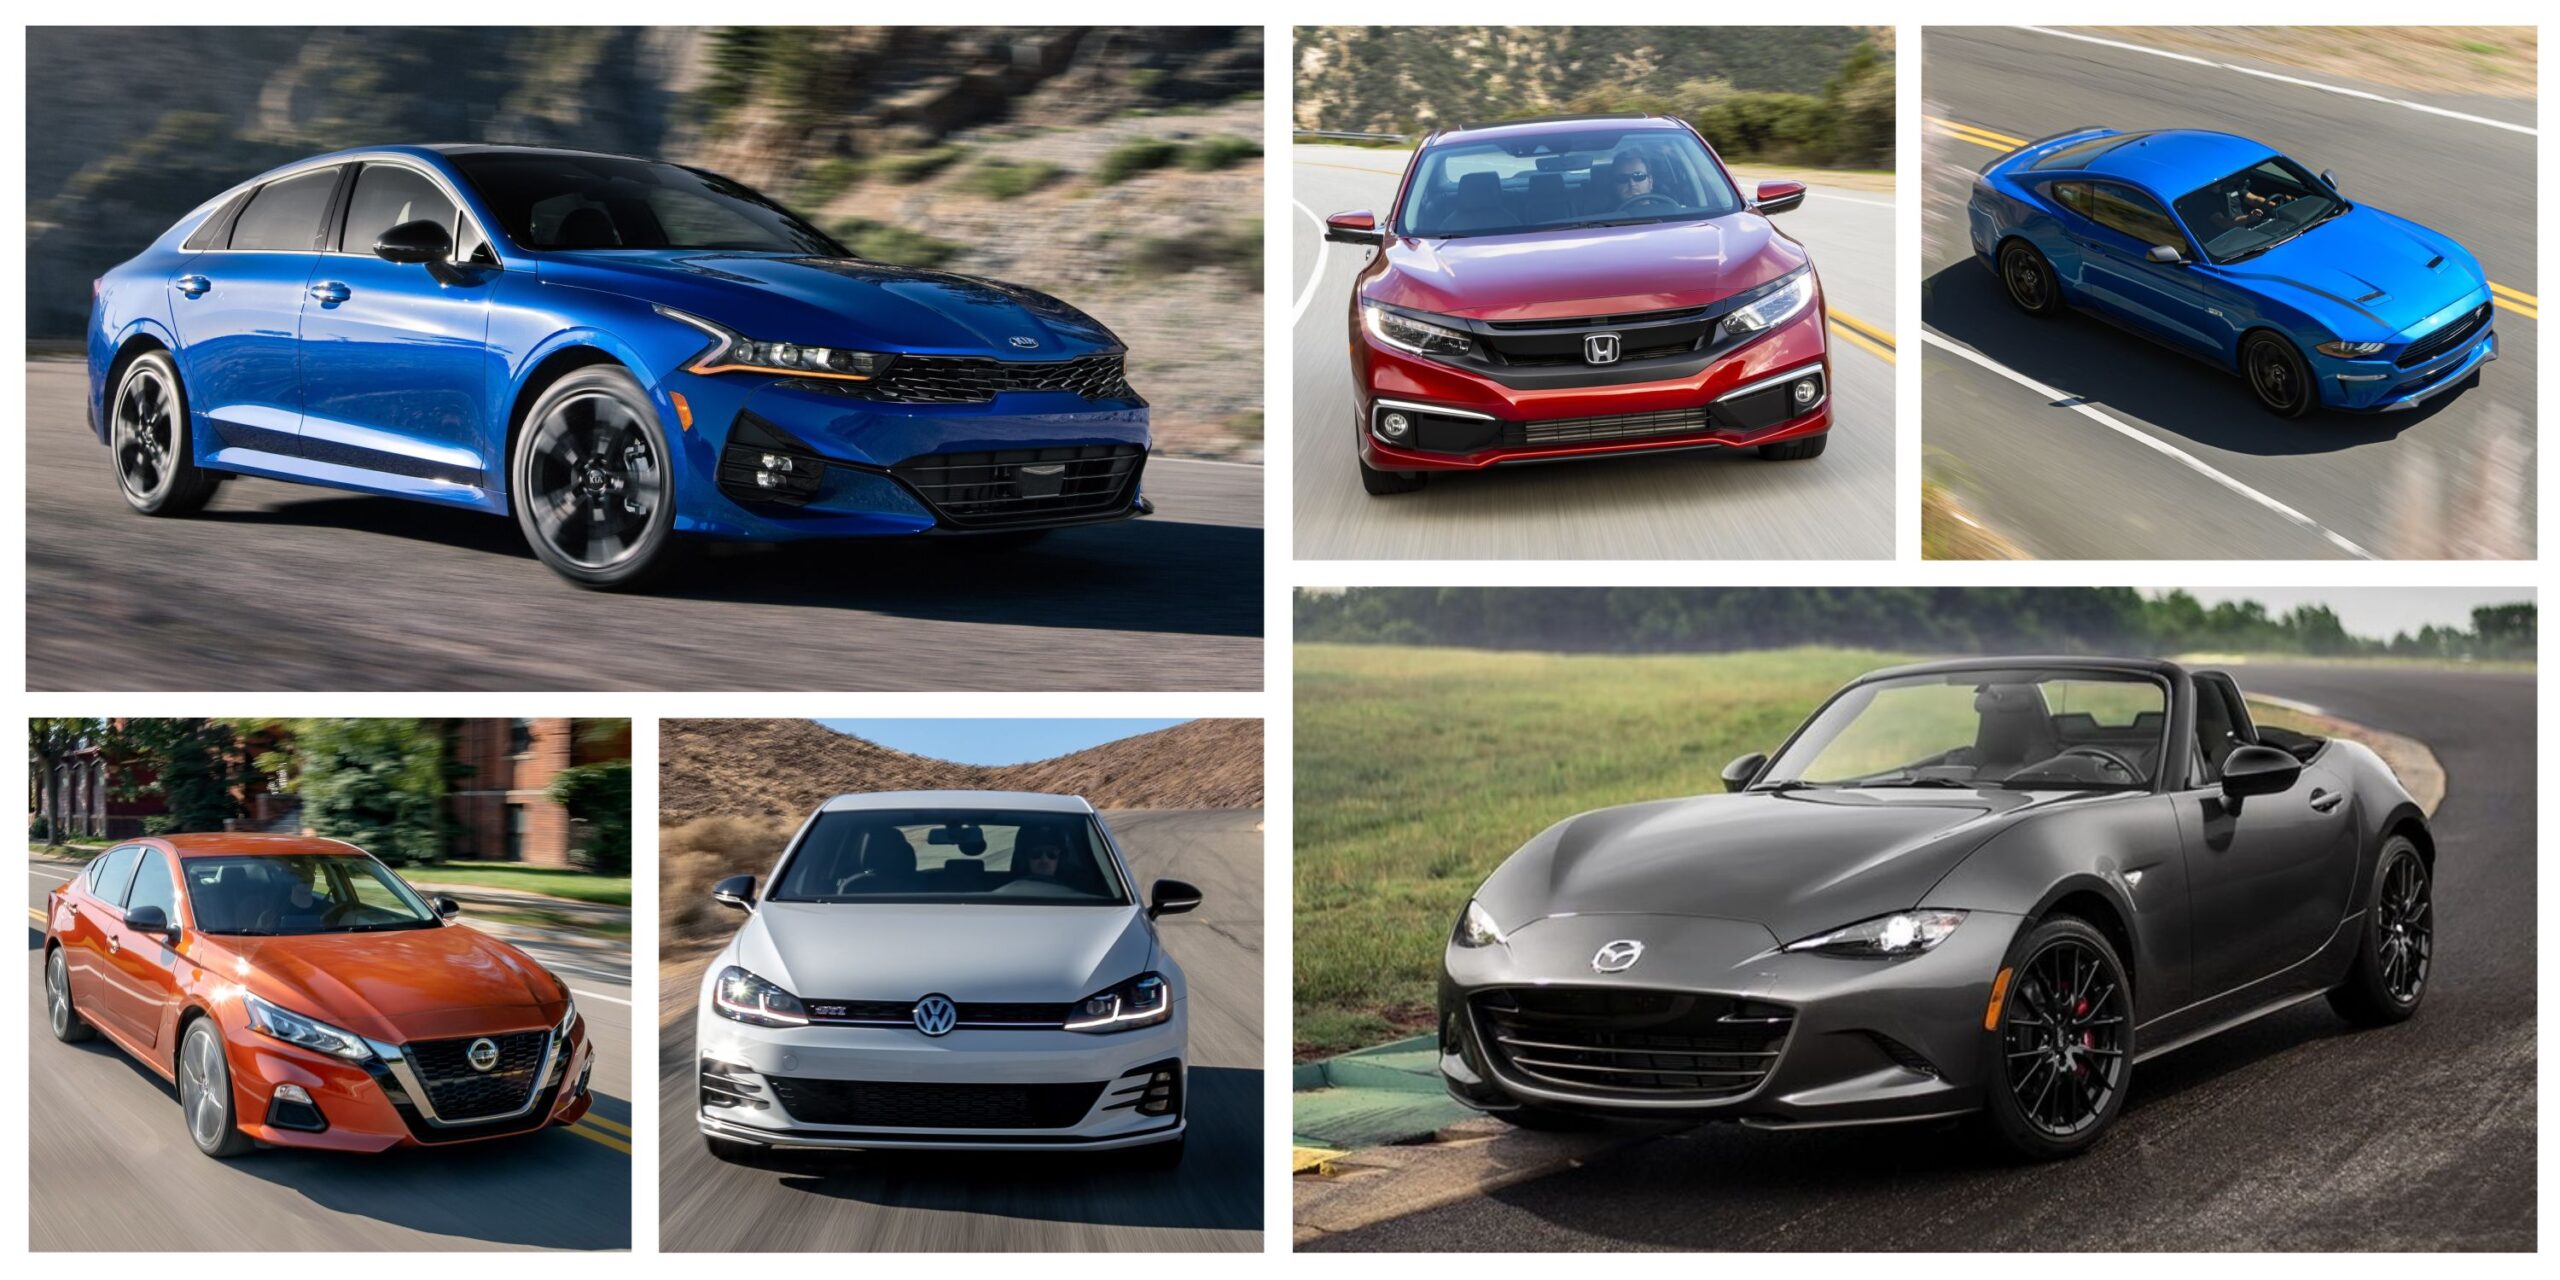 Best Compact Cars Under $ 30,000 in US